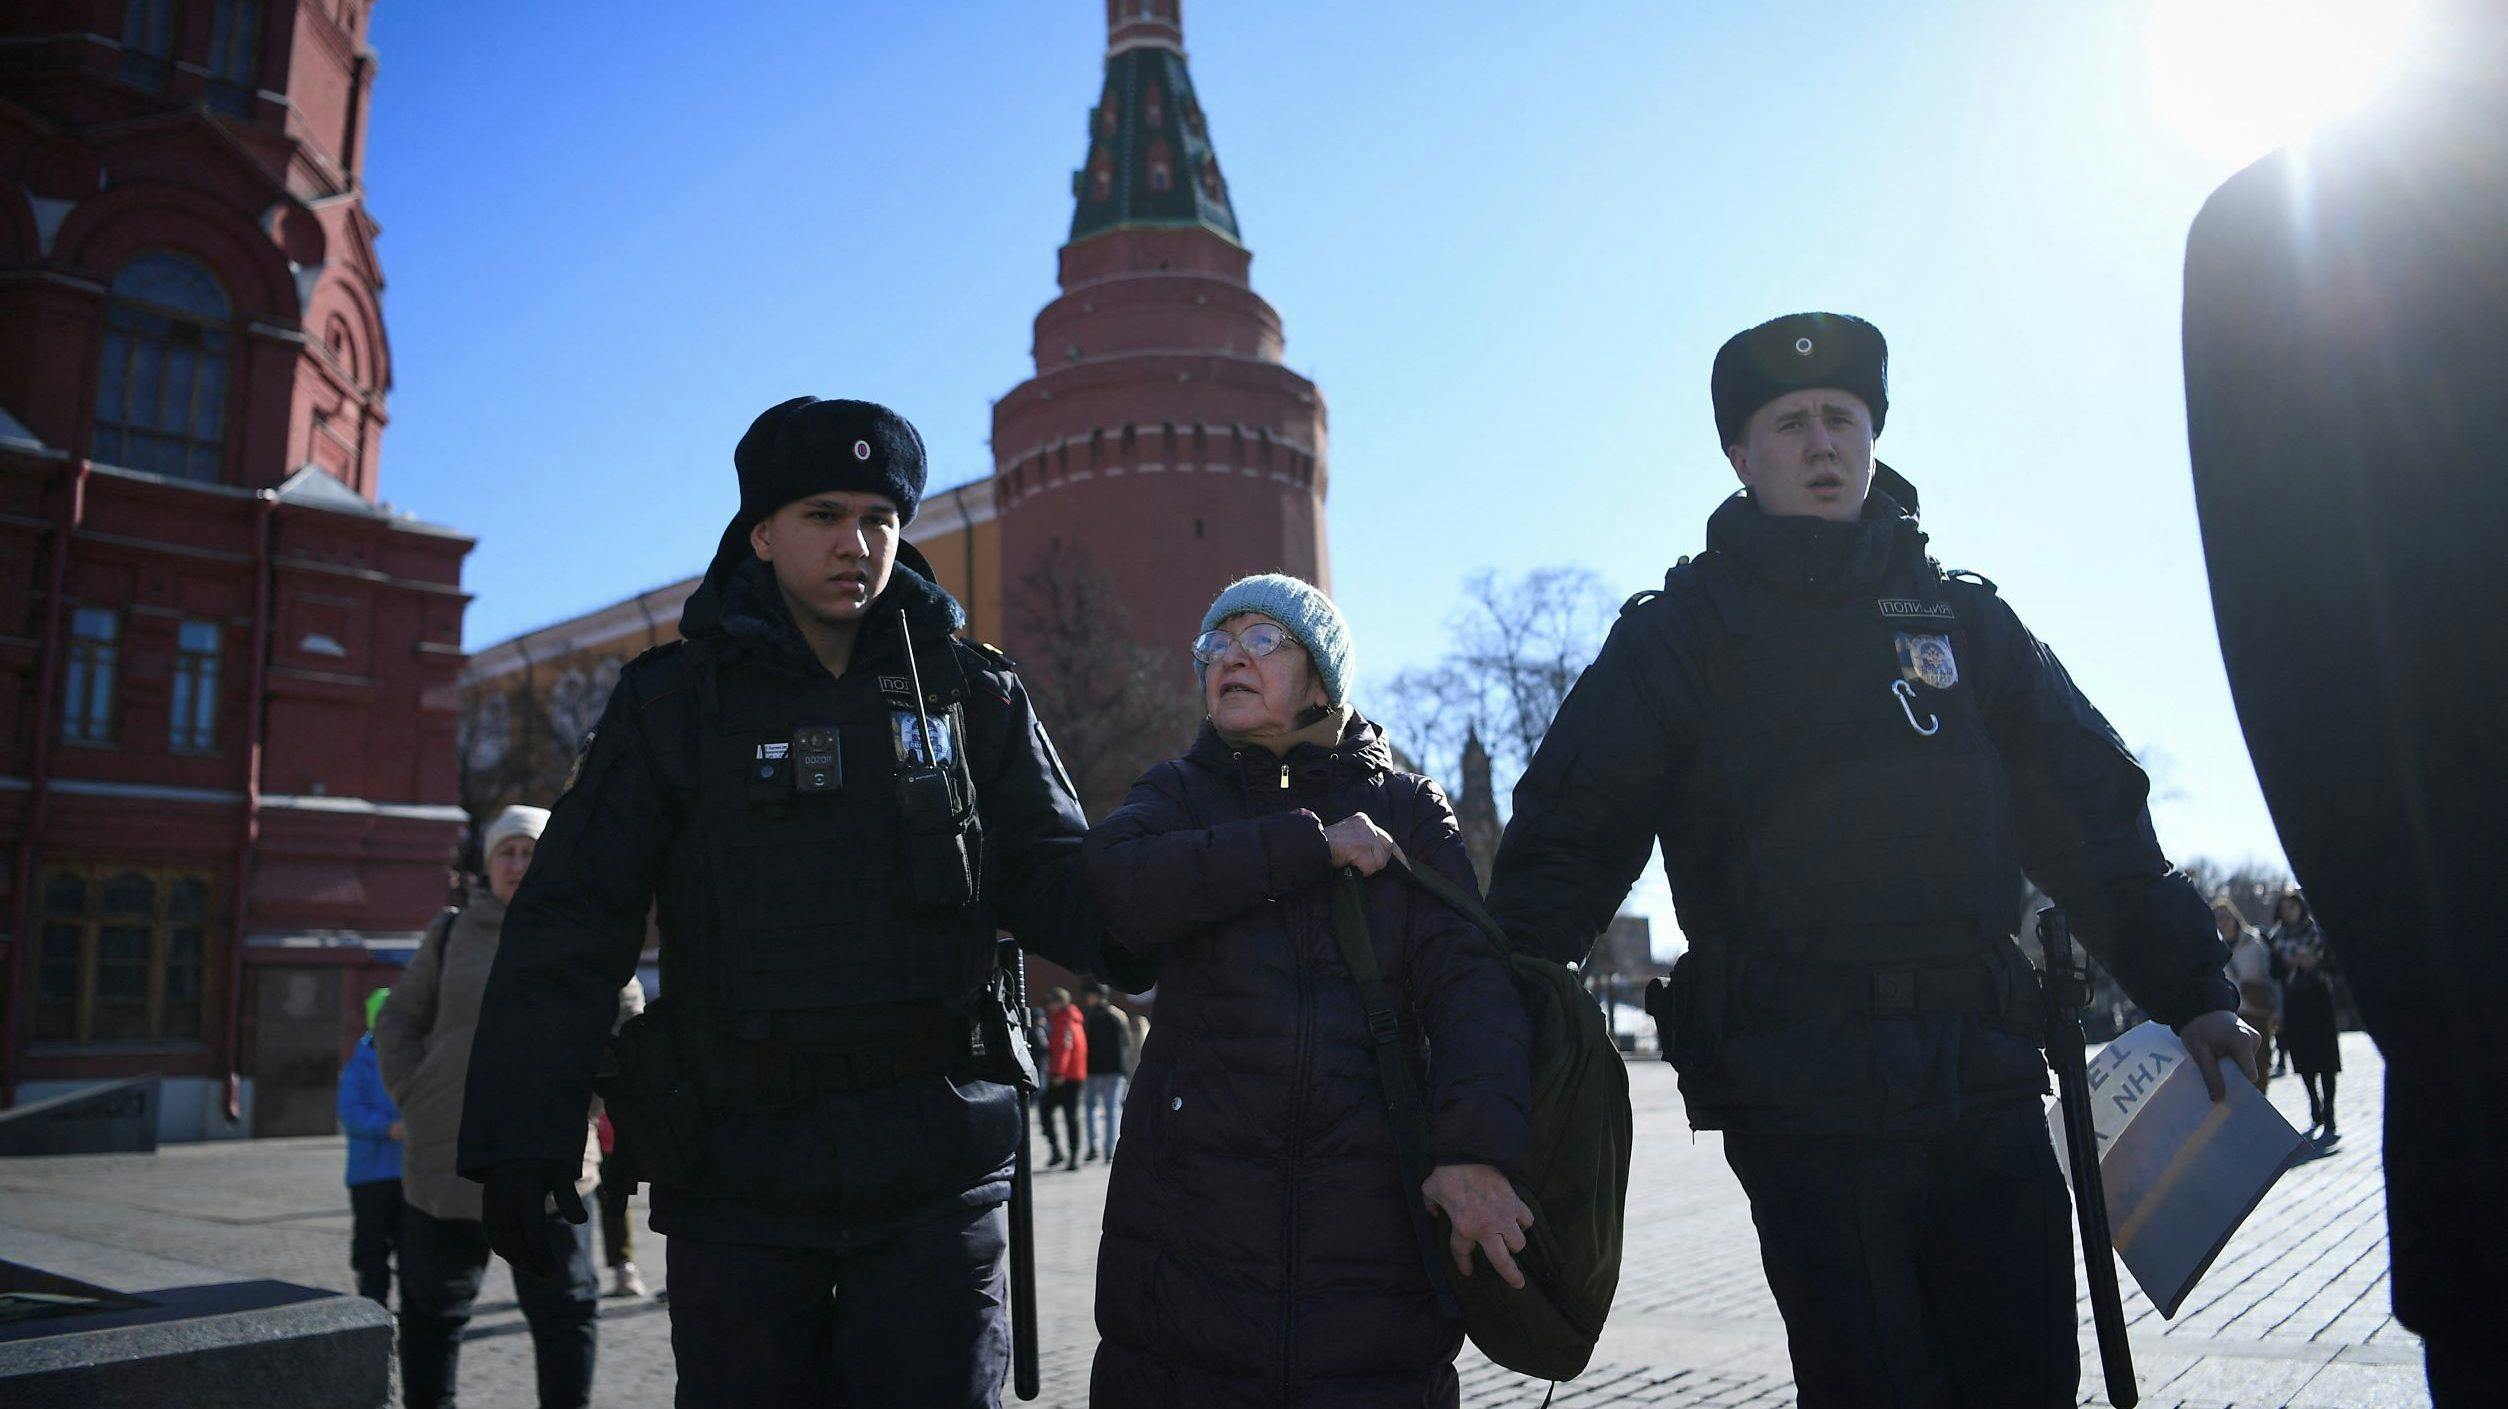 An elderly woman in Moscow is detained and flanked by two police officers as she protests Russia's invasion of Ukraine.